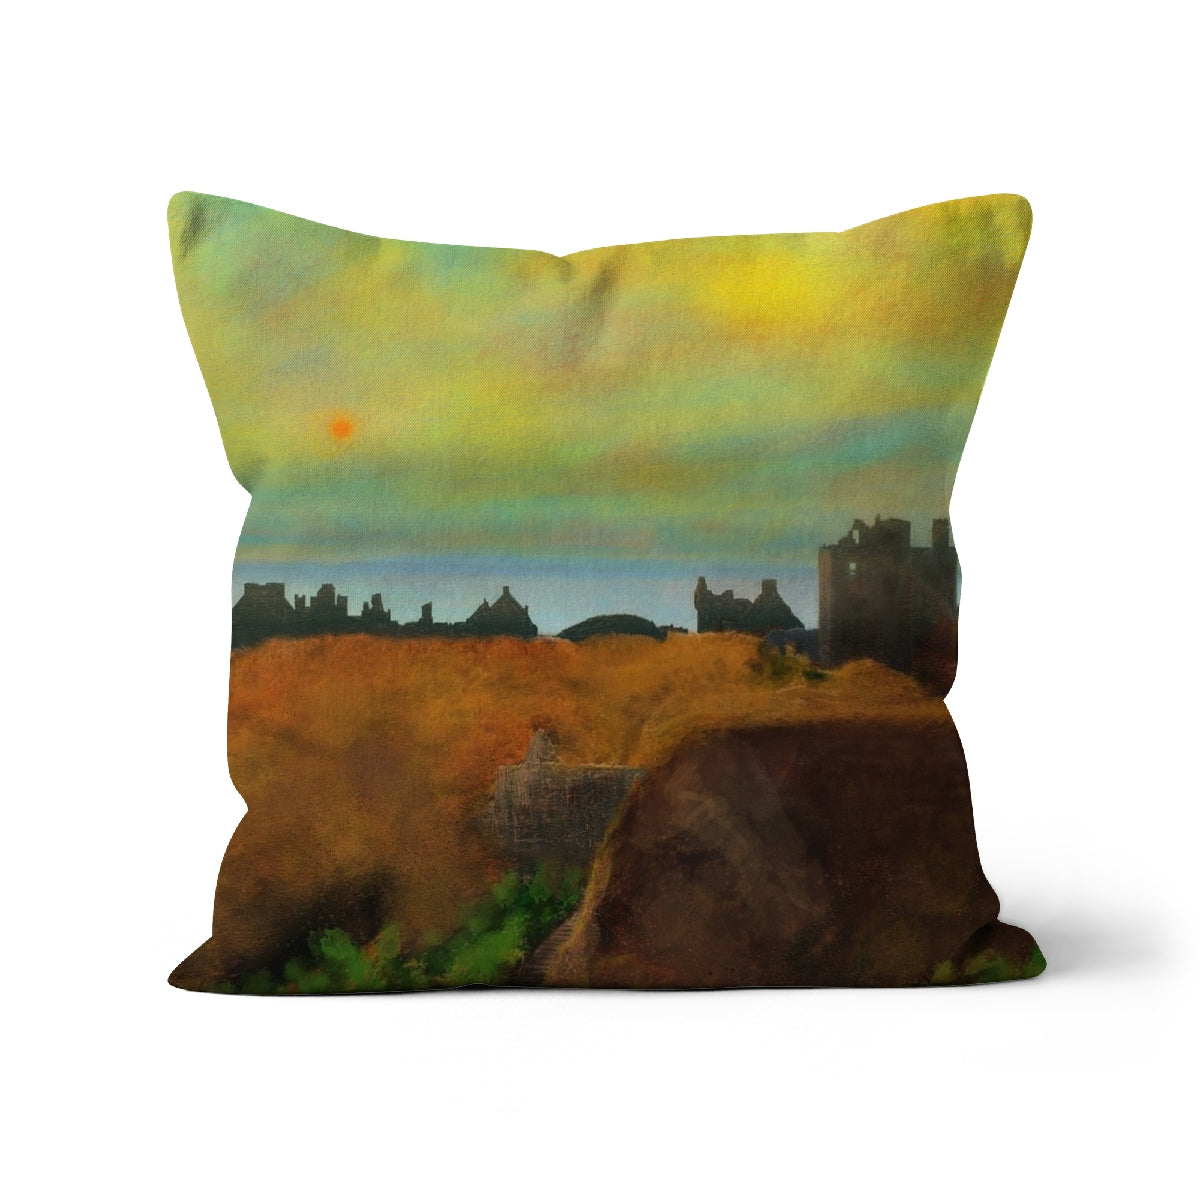 Dunnottar Castle Art Gifts Cushion-Cushions-Historic & Iconic Scotland Art Gallery-Faux Suede-18"x18"-Paintings, Prints, Homeware, Art Gifts From Scotland By Scottish Artist Kevin Hunter